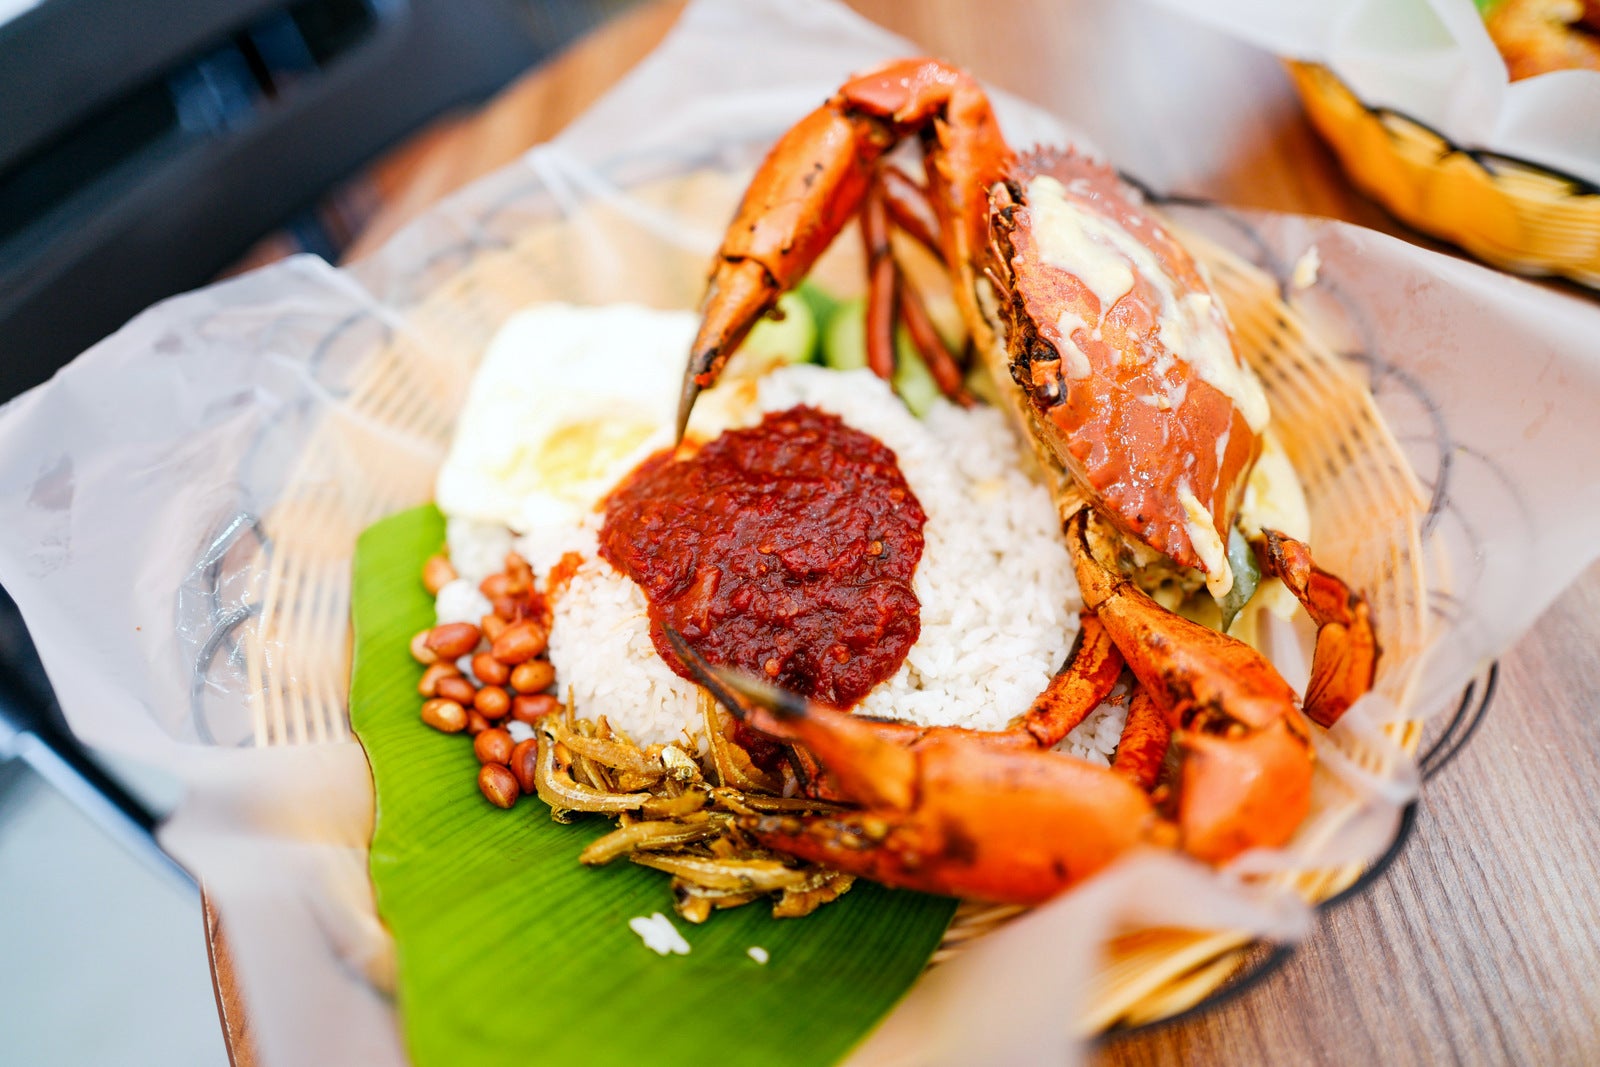 This M'sian Restaurant Offers Yummy Nasi Lemak Lobster & Crab Starting from RM20! - WORLD OF BUZZ 3